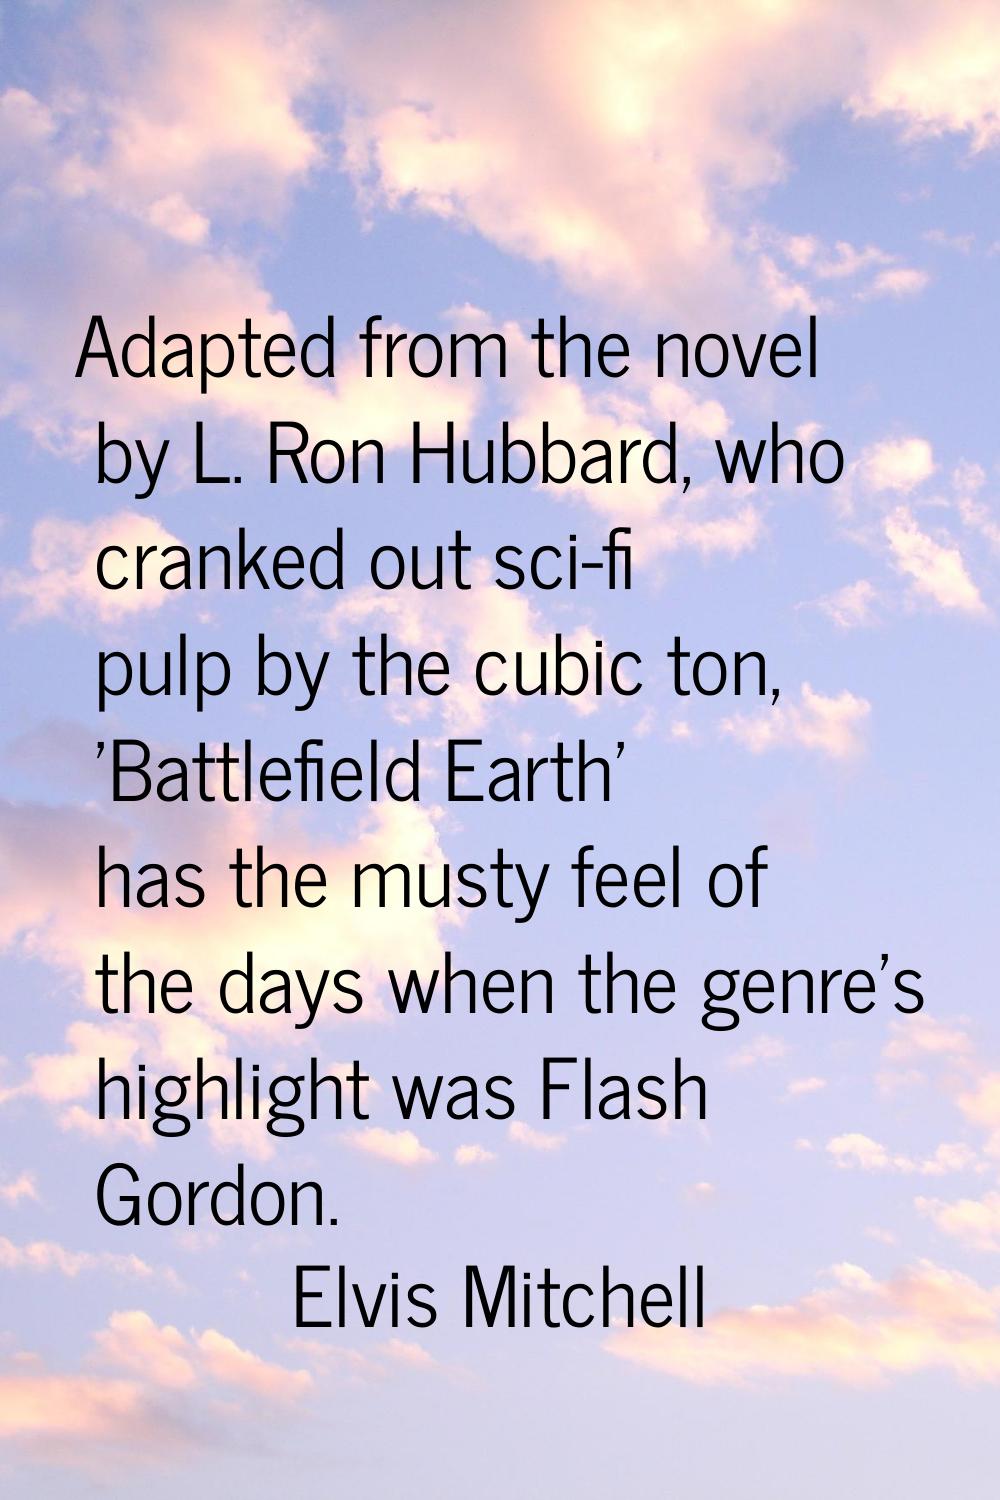 Adapted from the novel by L. Ron Hubbard, who cranked out sci-fi pulp by the cubic ton, 'Battlefiel